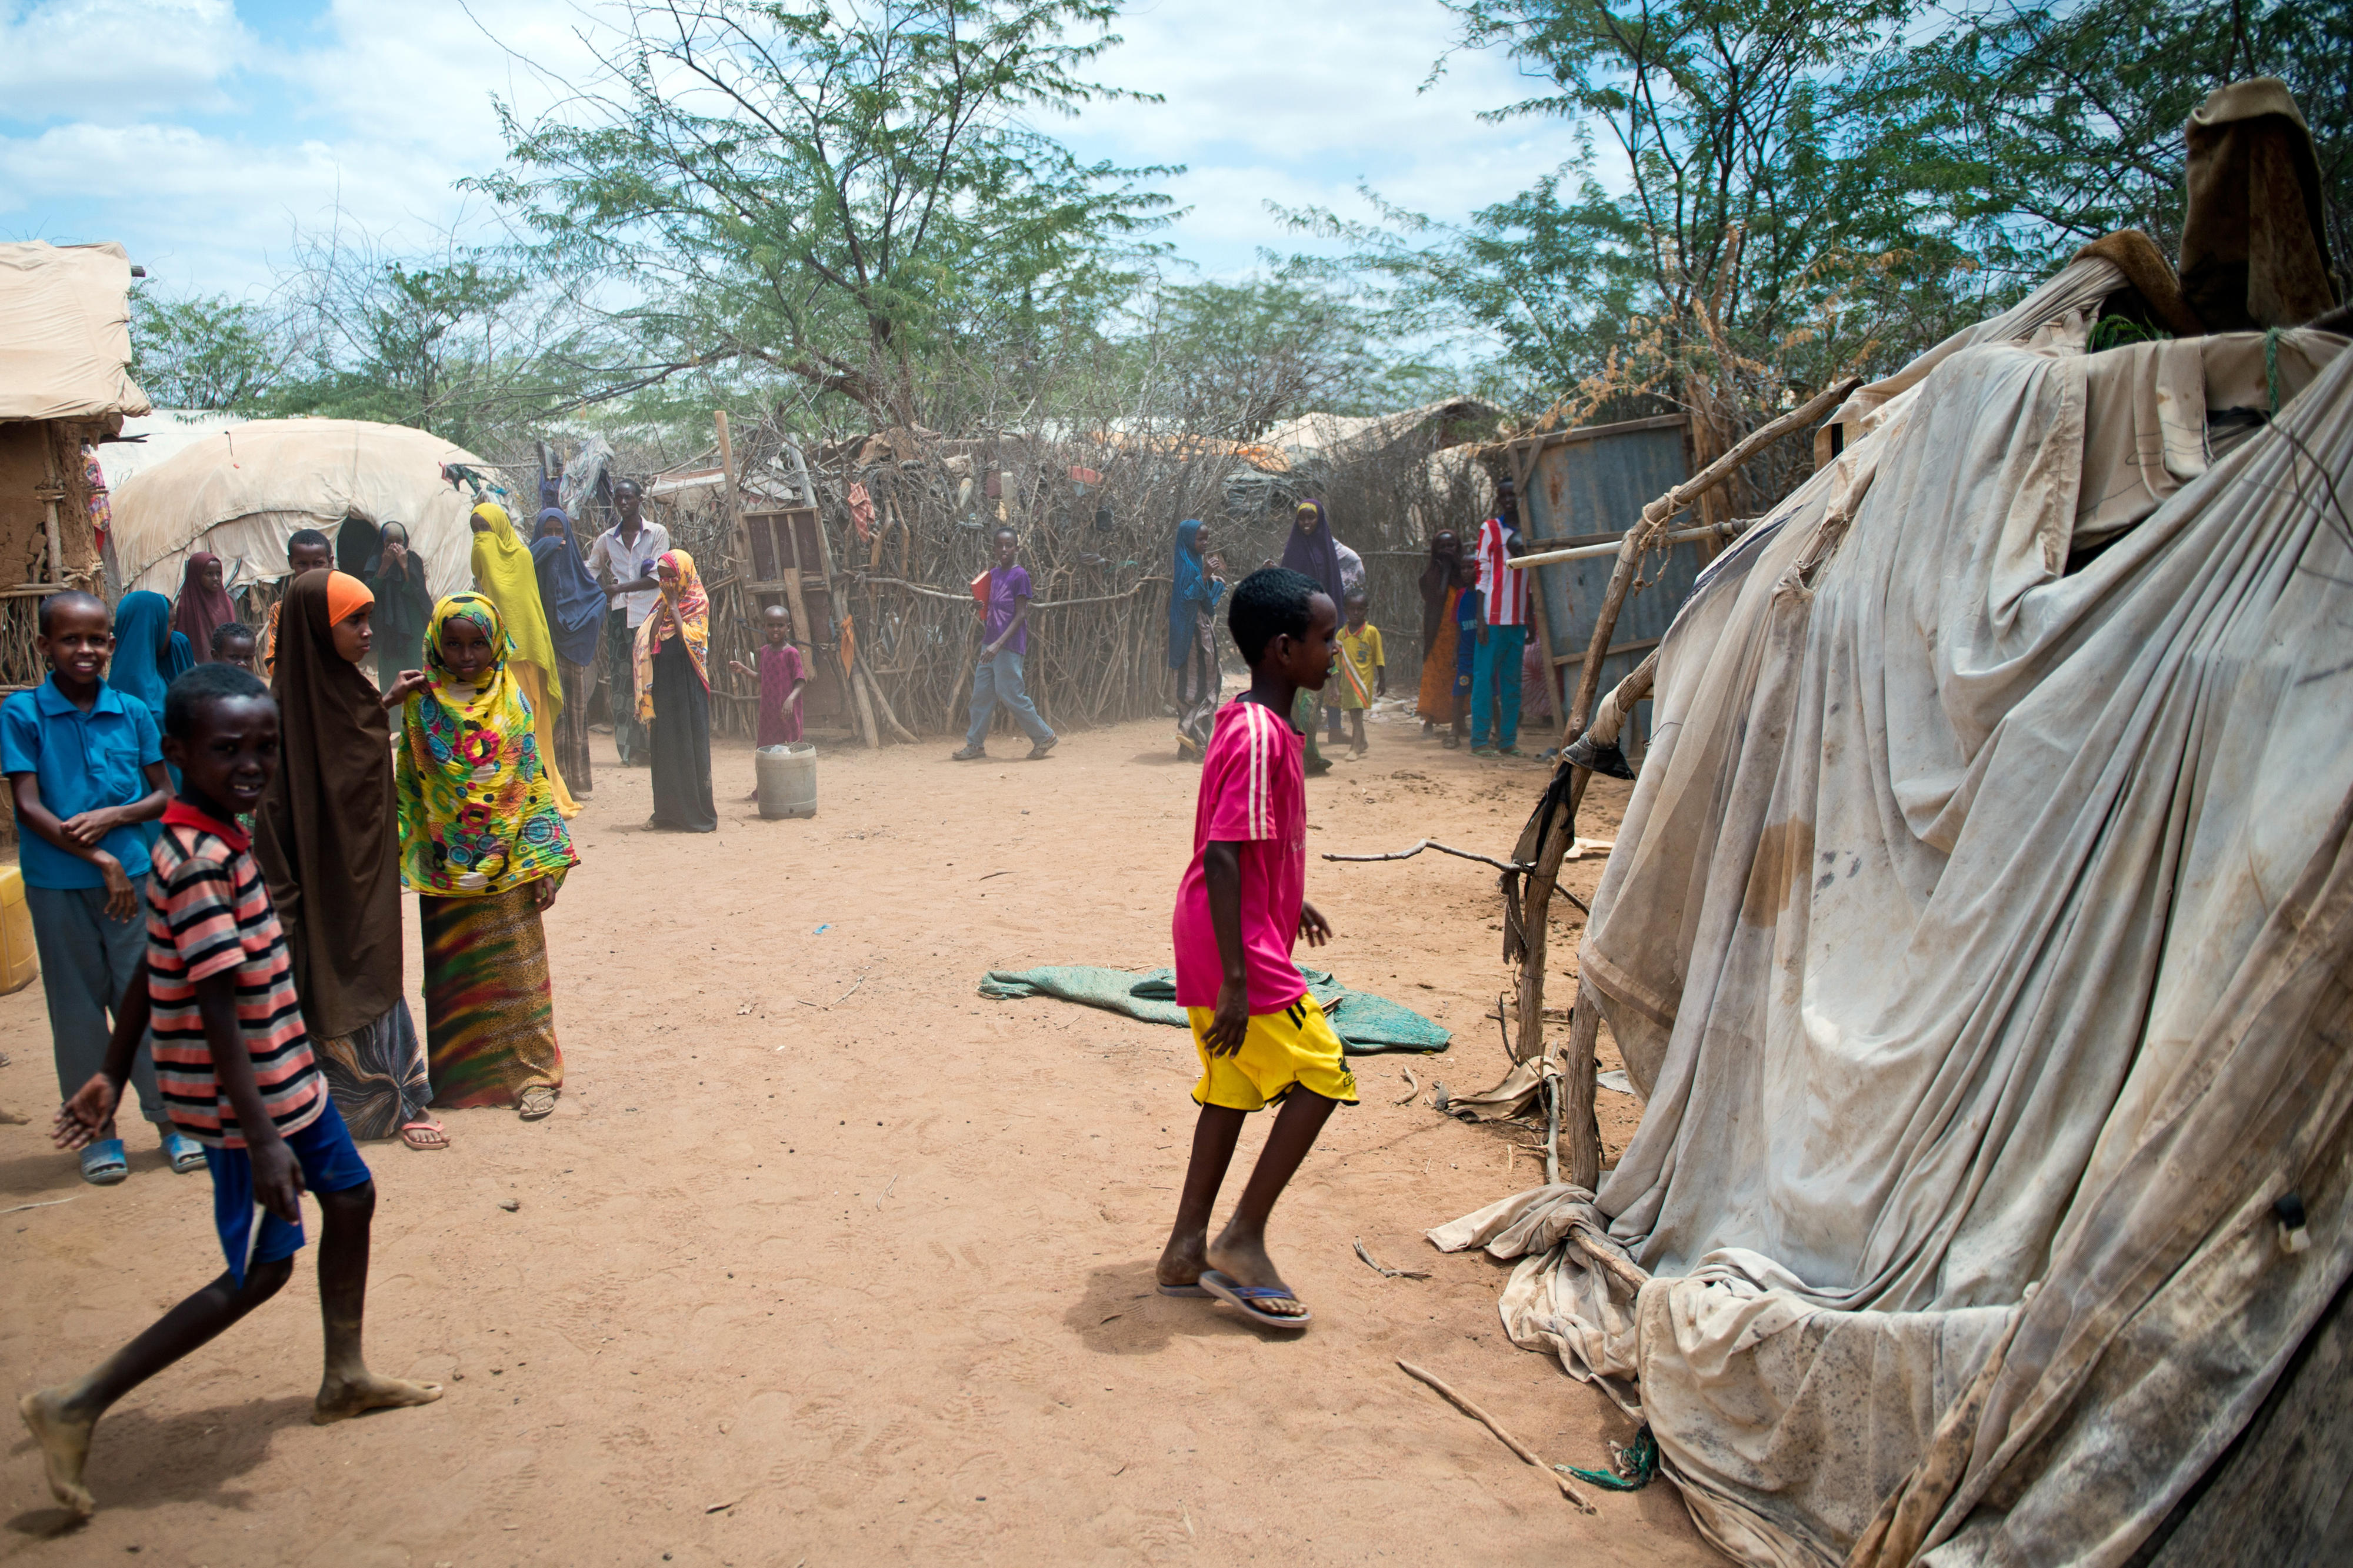 Refugees in front of their huts in Dadaab refugee camp